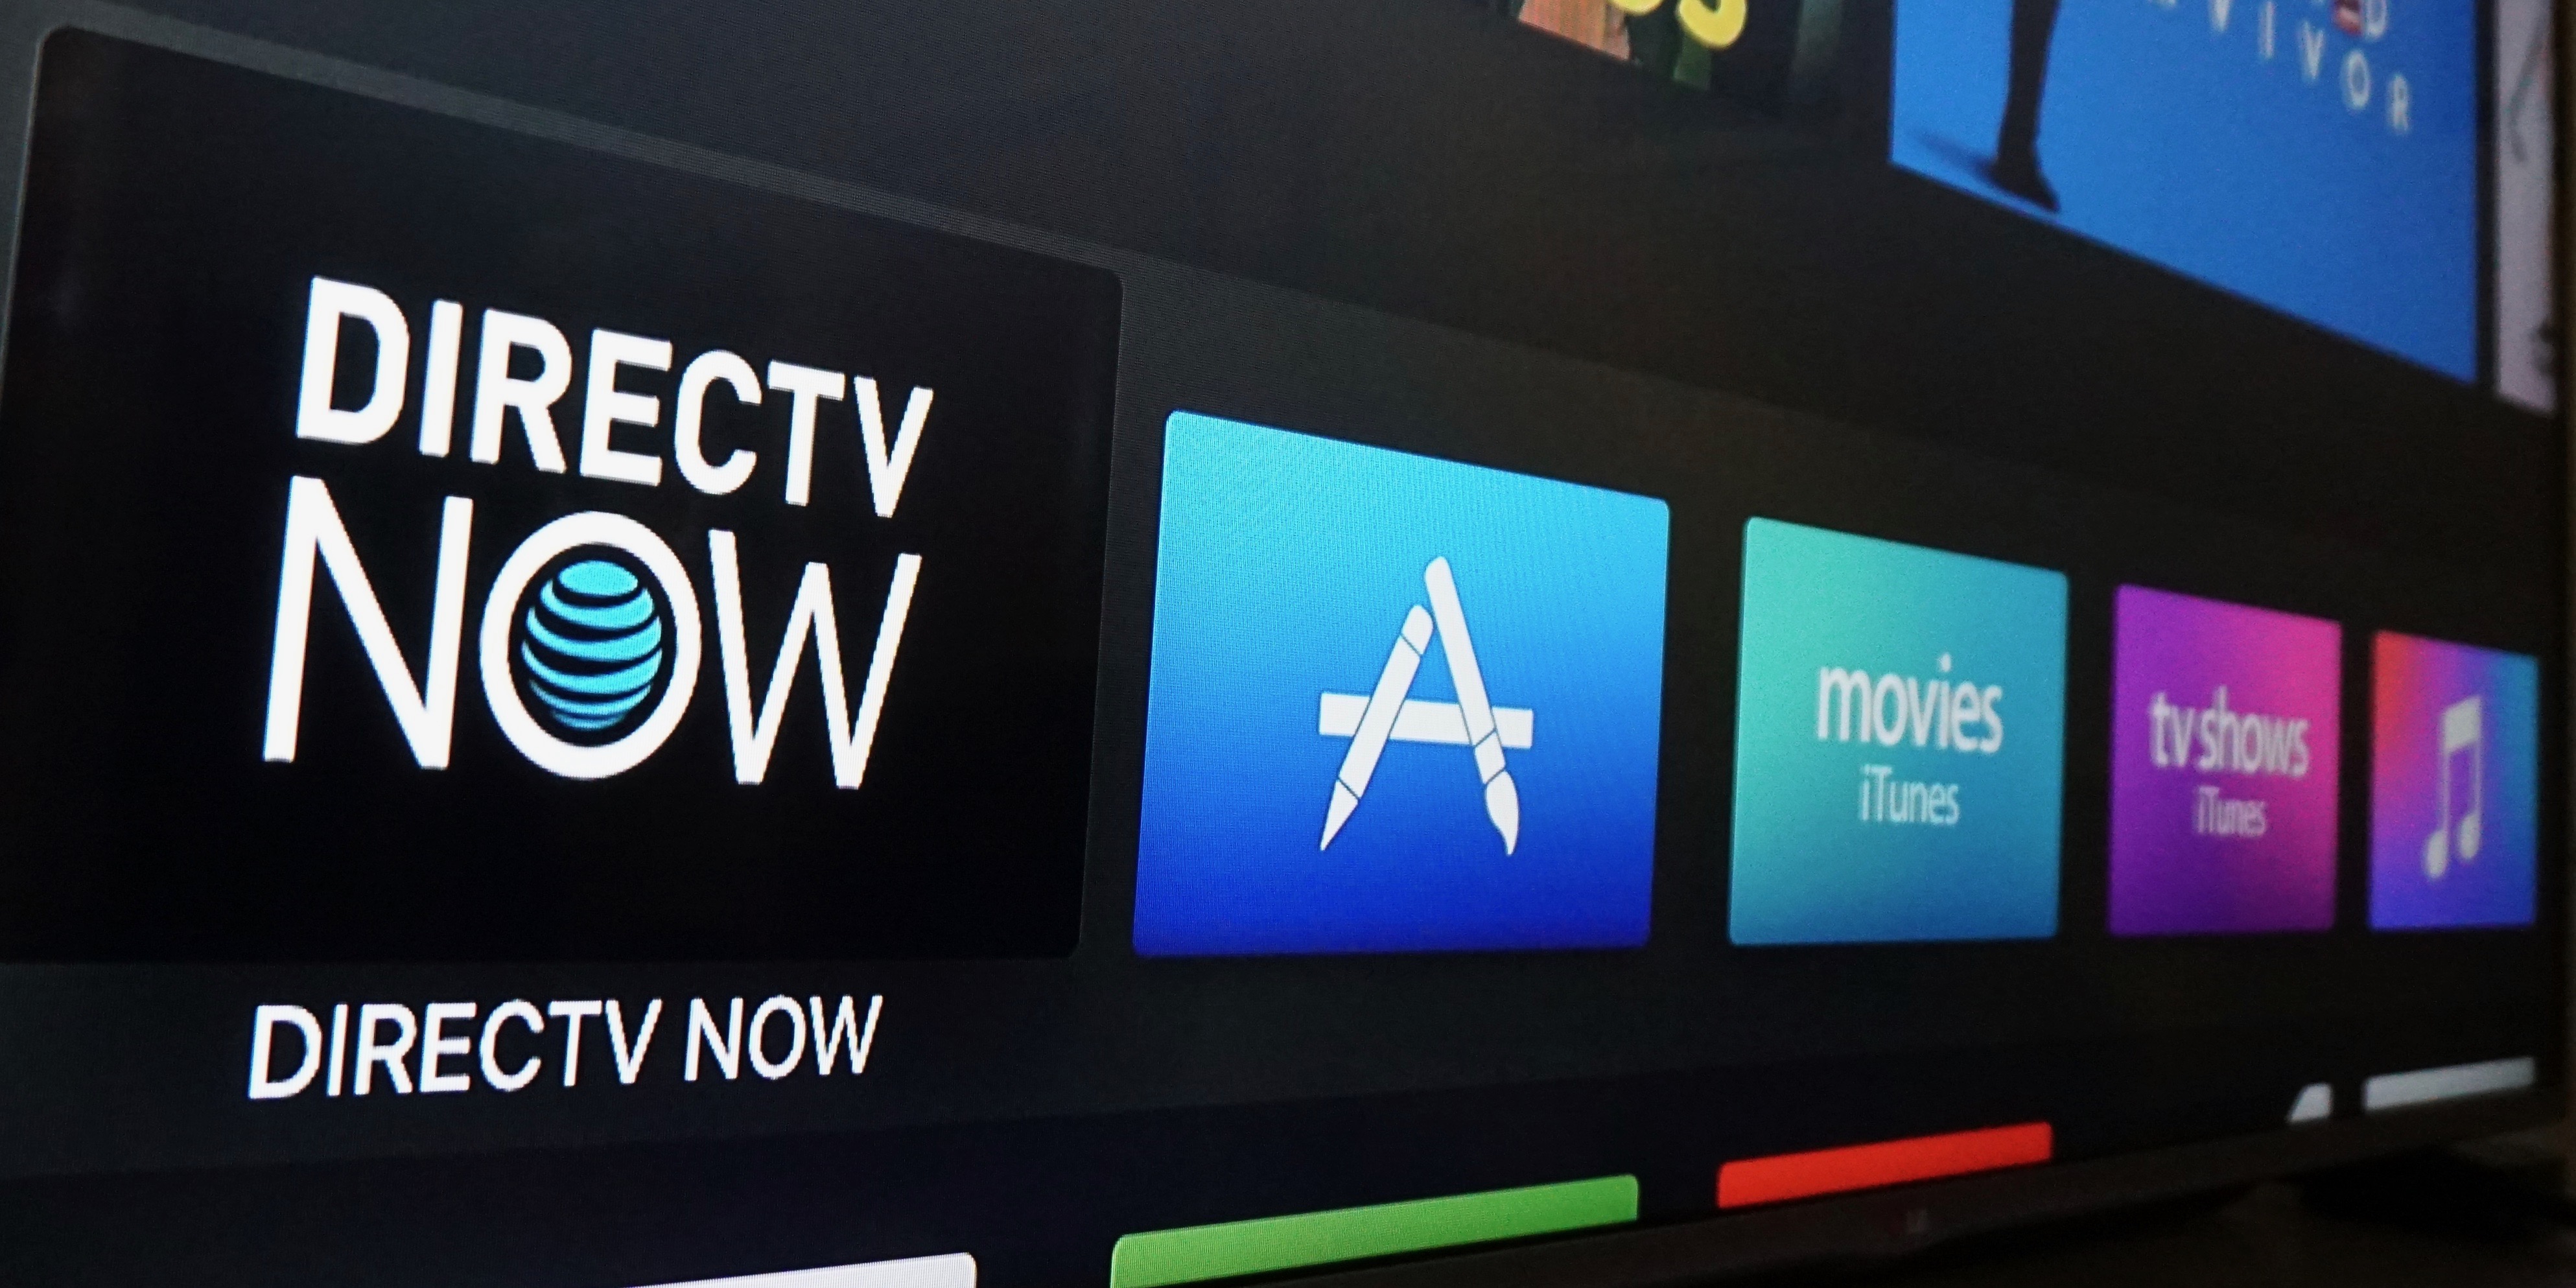 CBS reaches deal to bring The CW, Showtime, and more to DirecTV Now